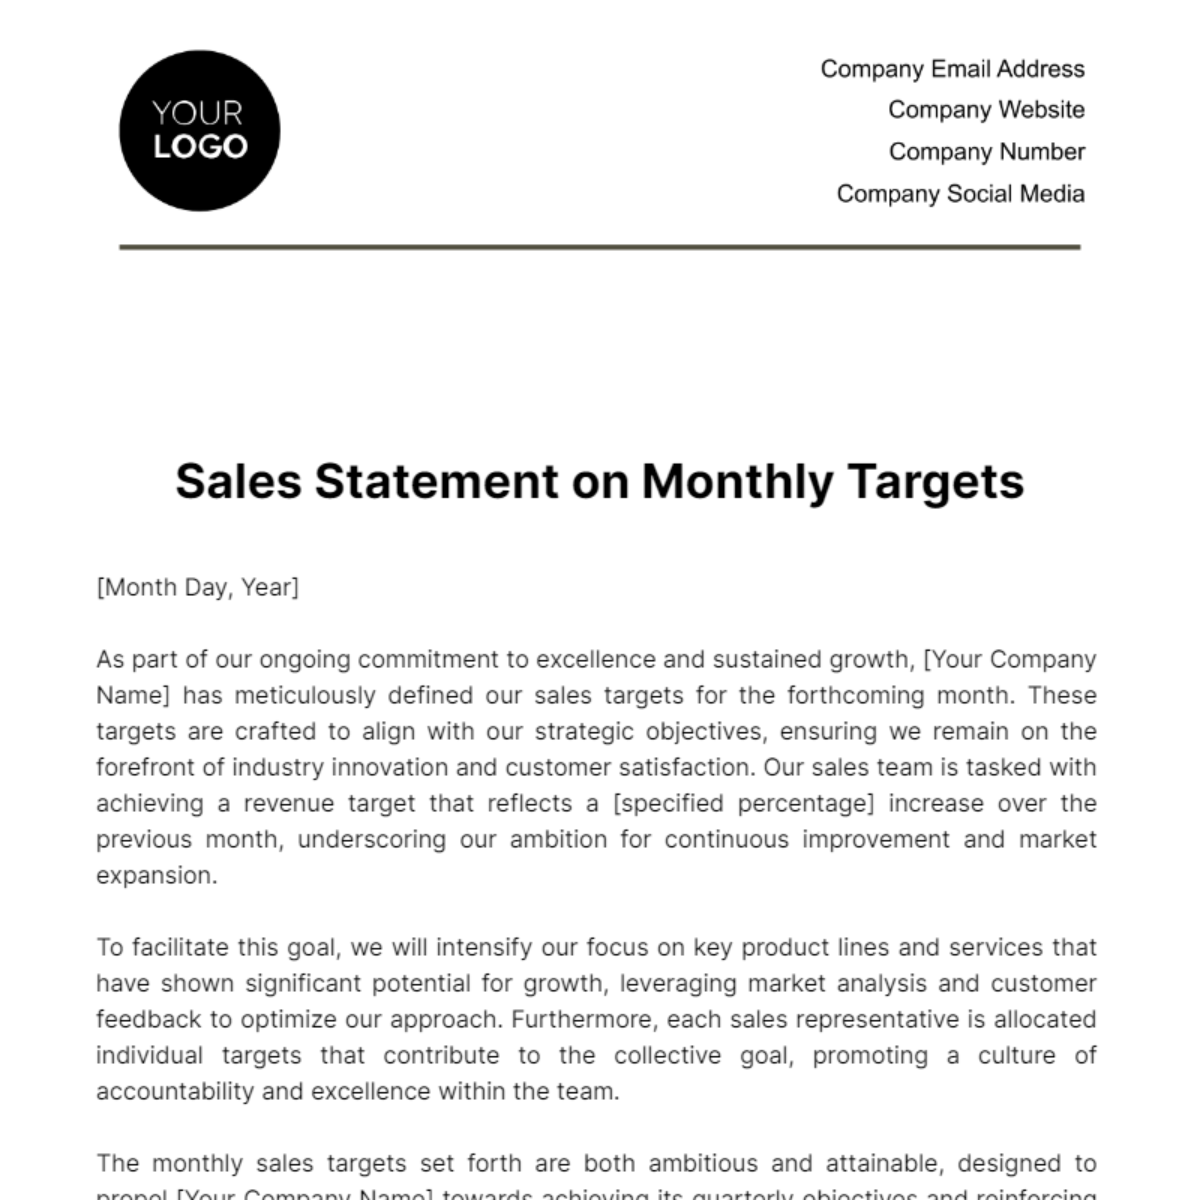 Free Sales Statement on Monthly Targets Template